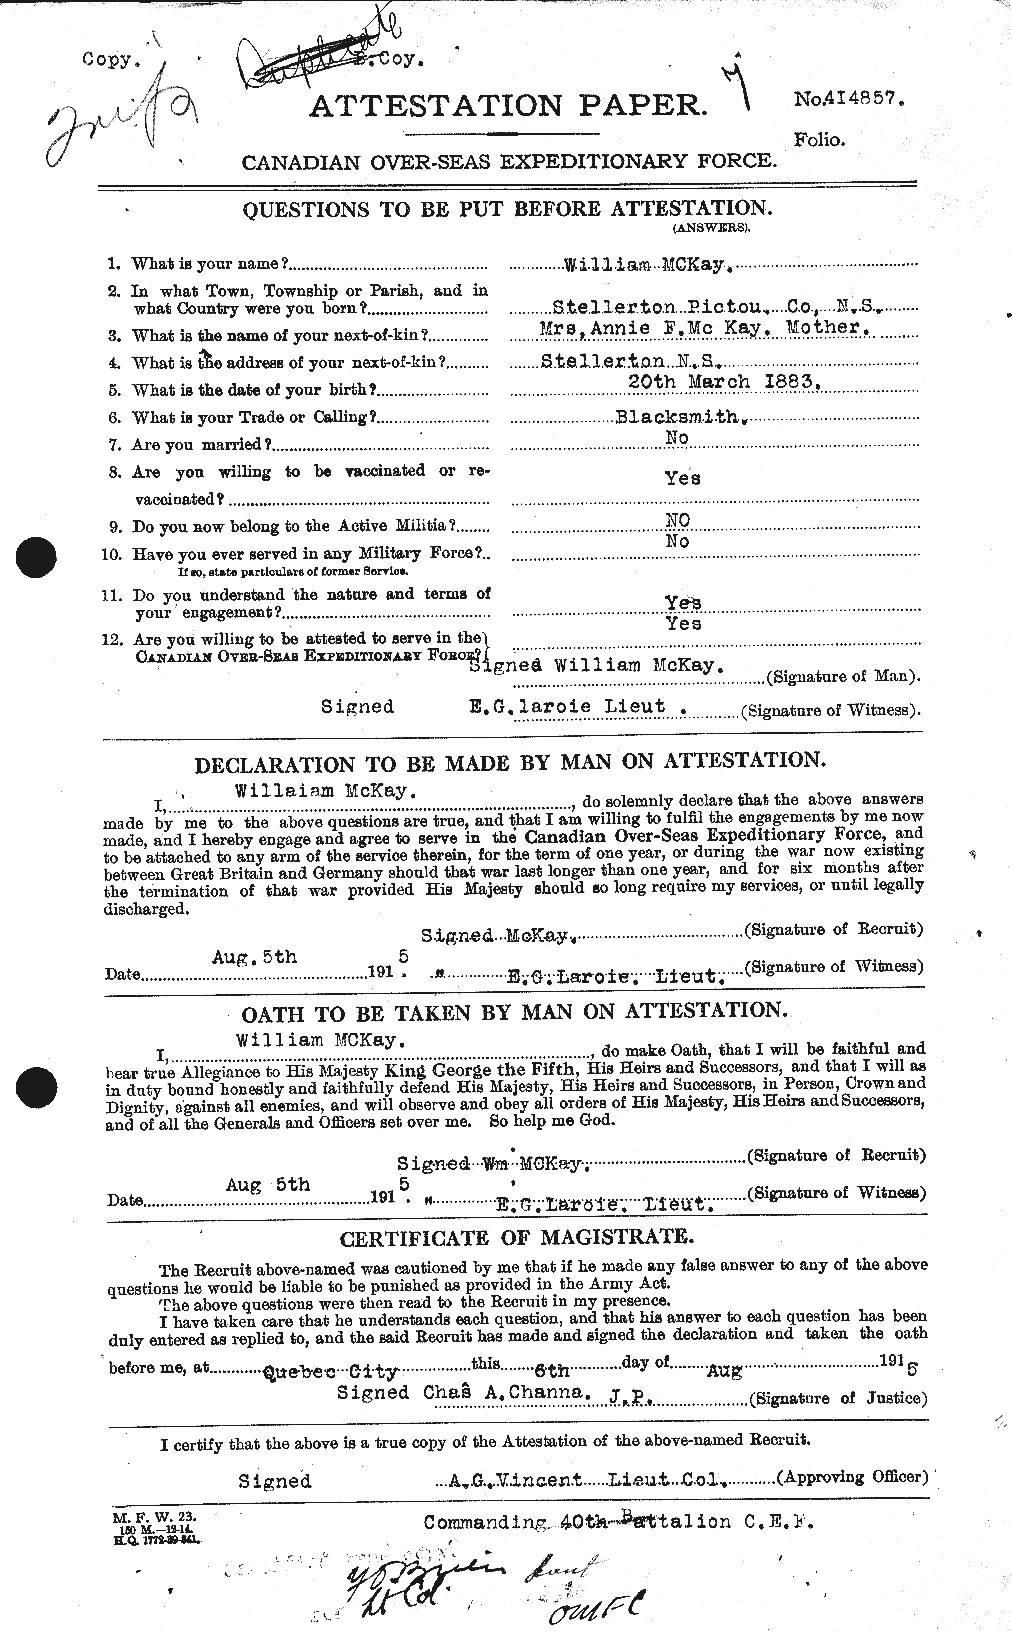 Personnel Records of the First World War - CEF 530222a